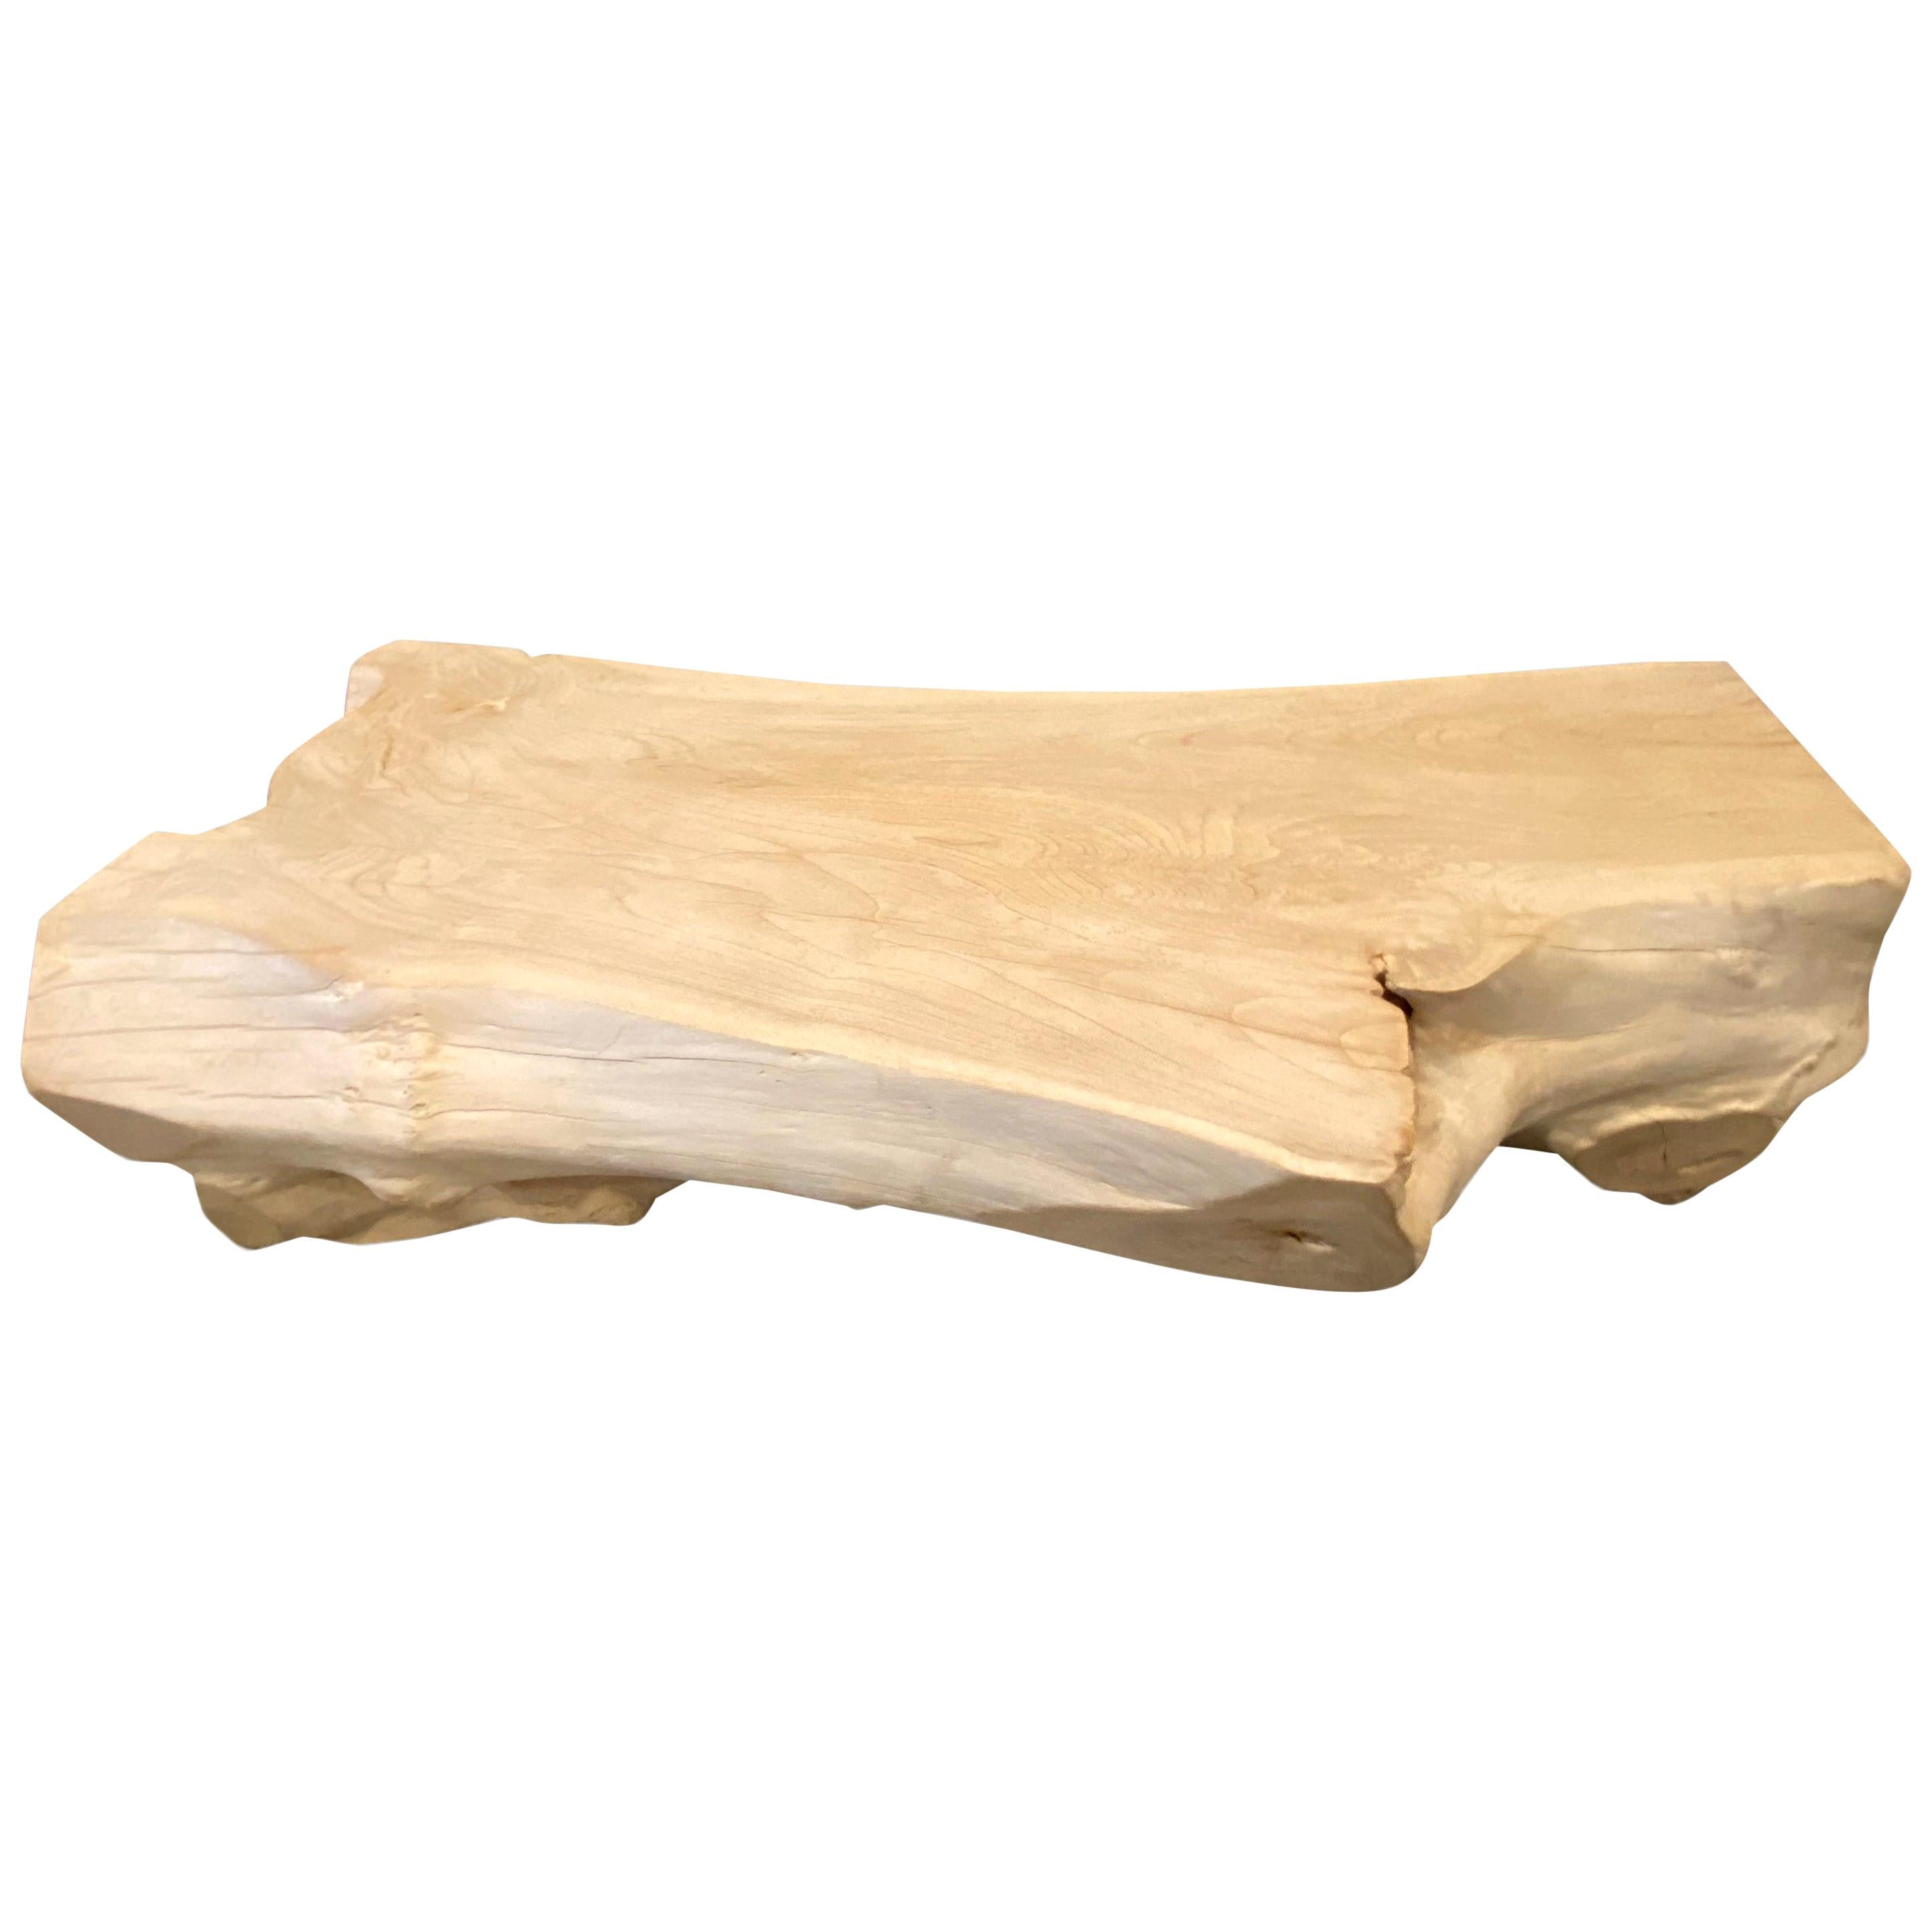 Andrianna Shamaris Style Barts Organic Teak Wood Coffee Table or Bench For Sale